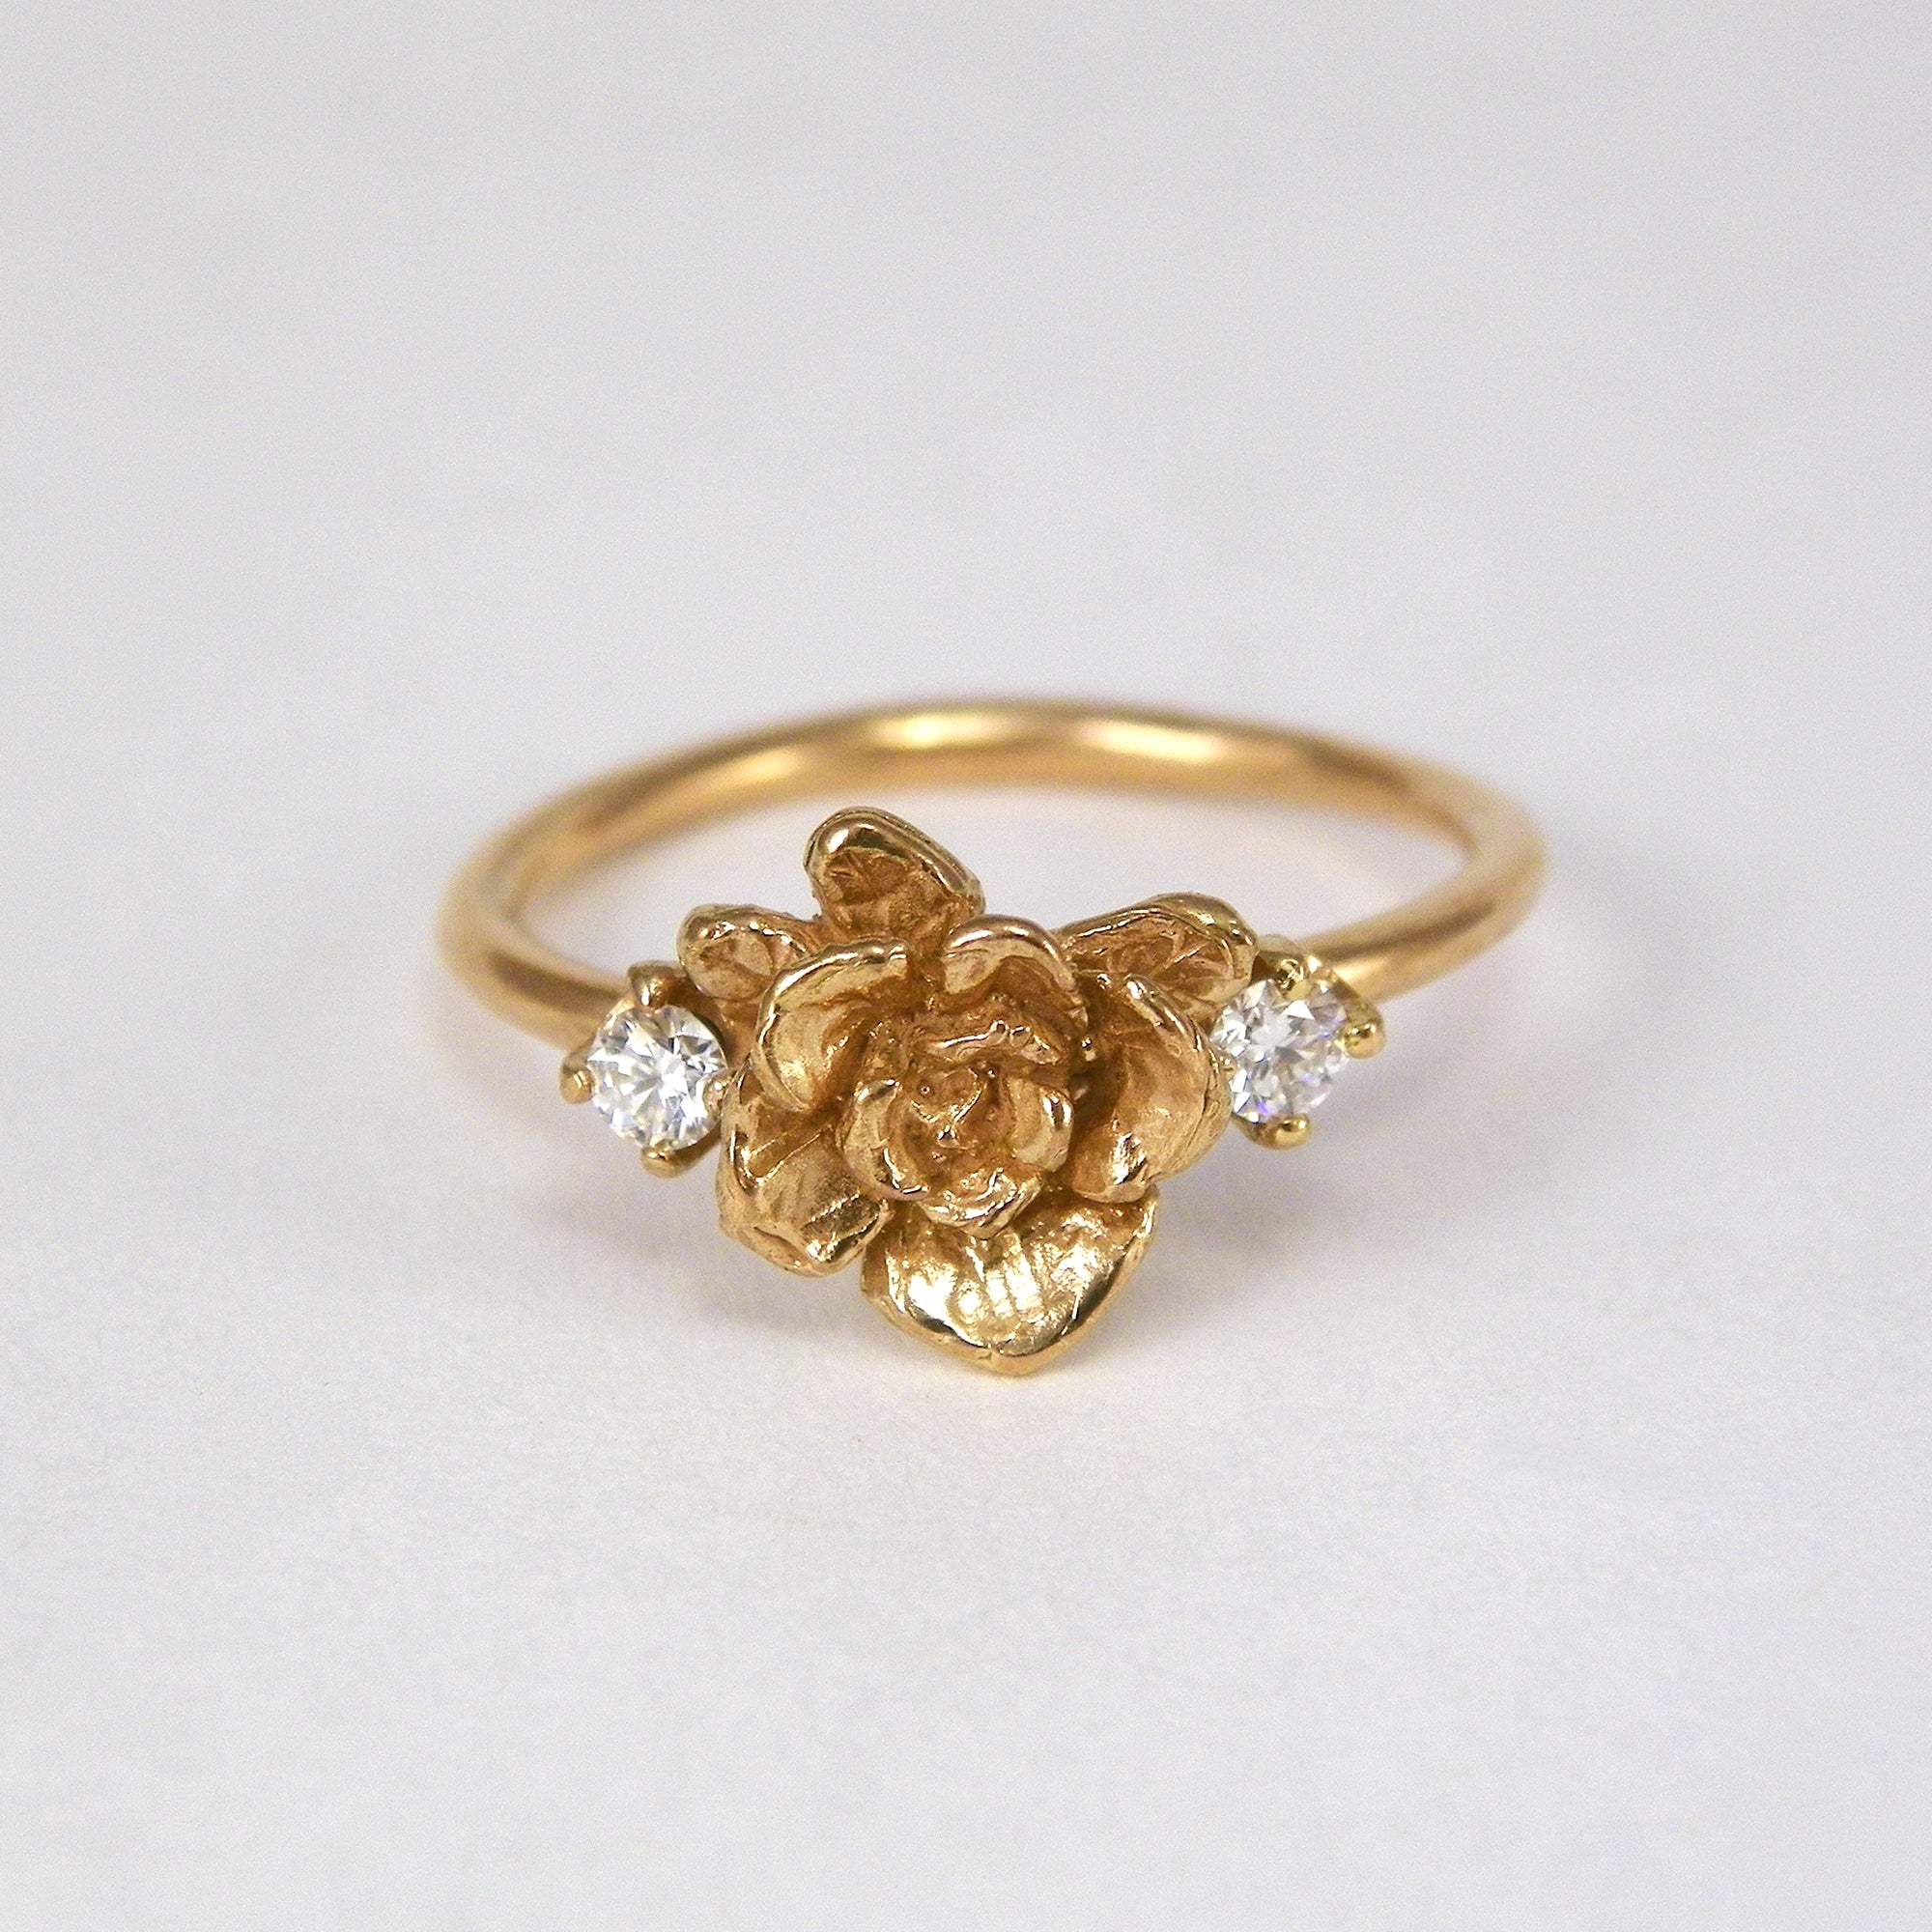 Gold Mini Rose Ring with Diamonds